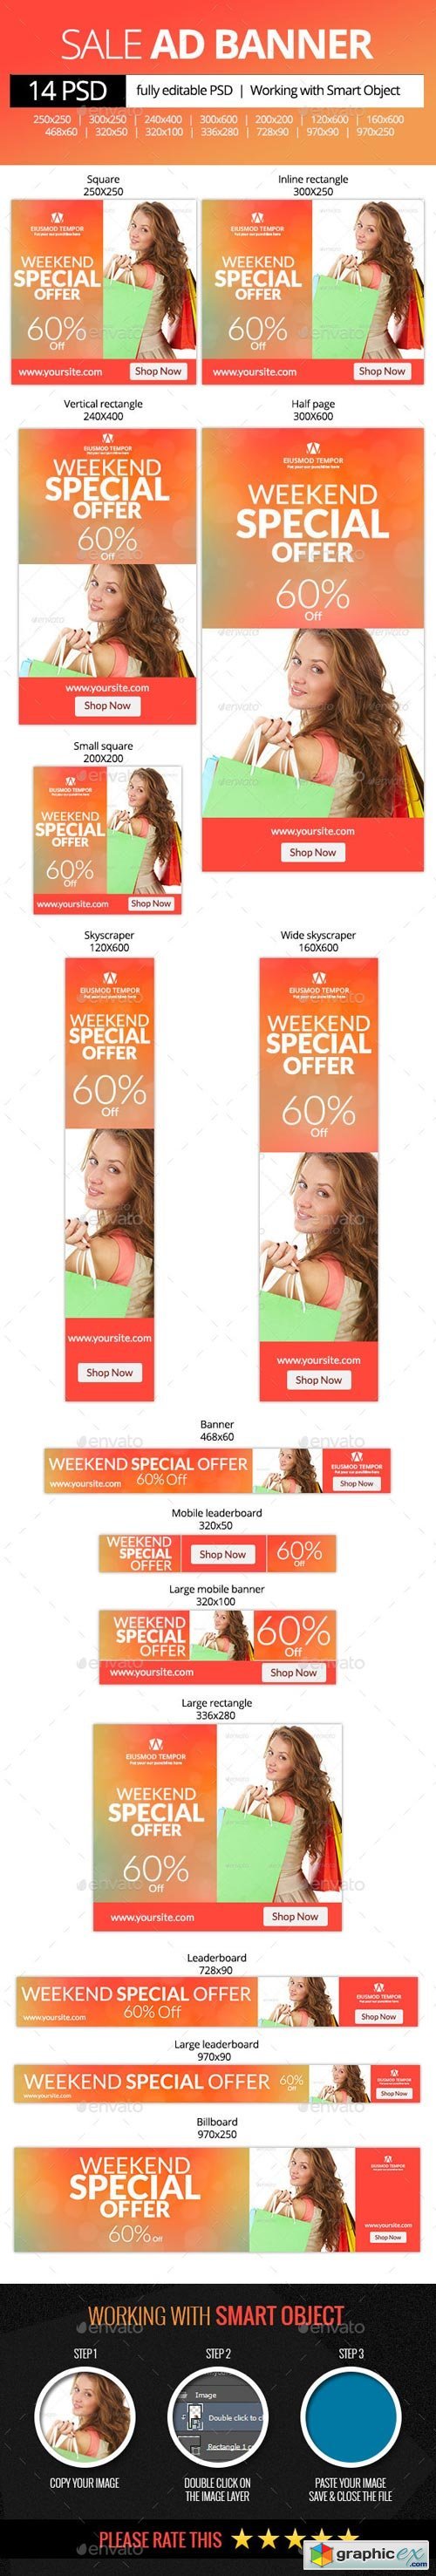 Weekend Special Offer Web Banners